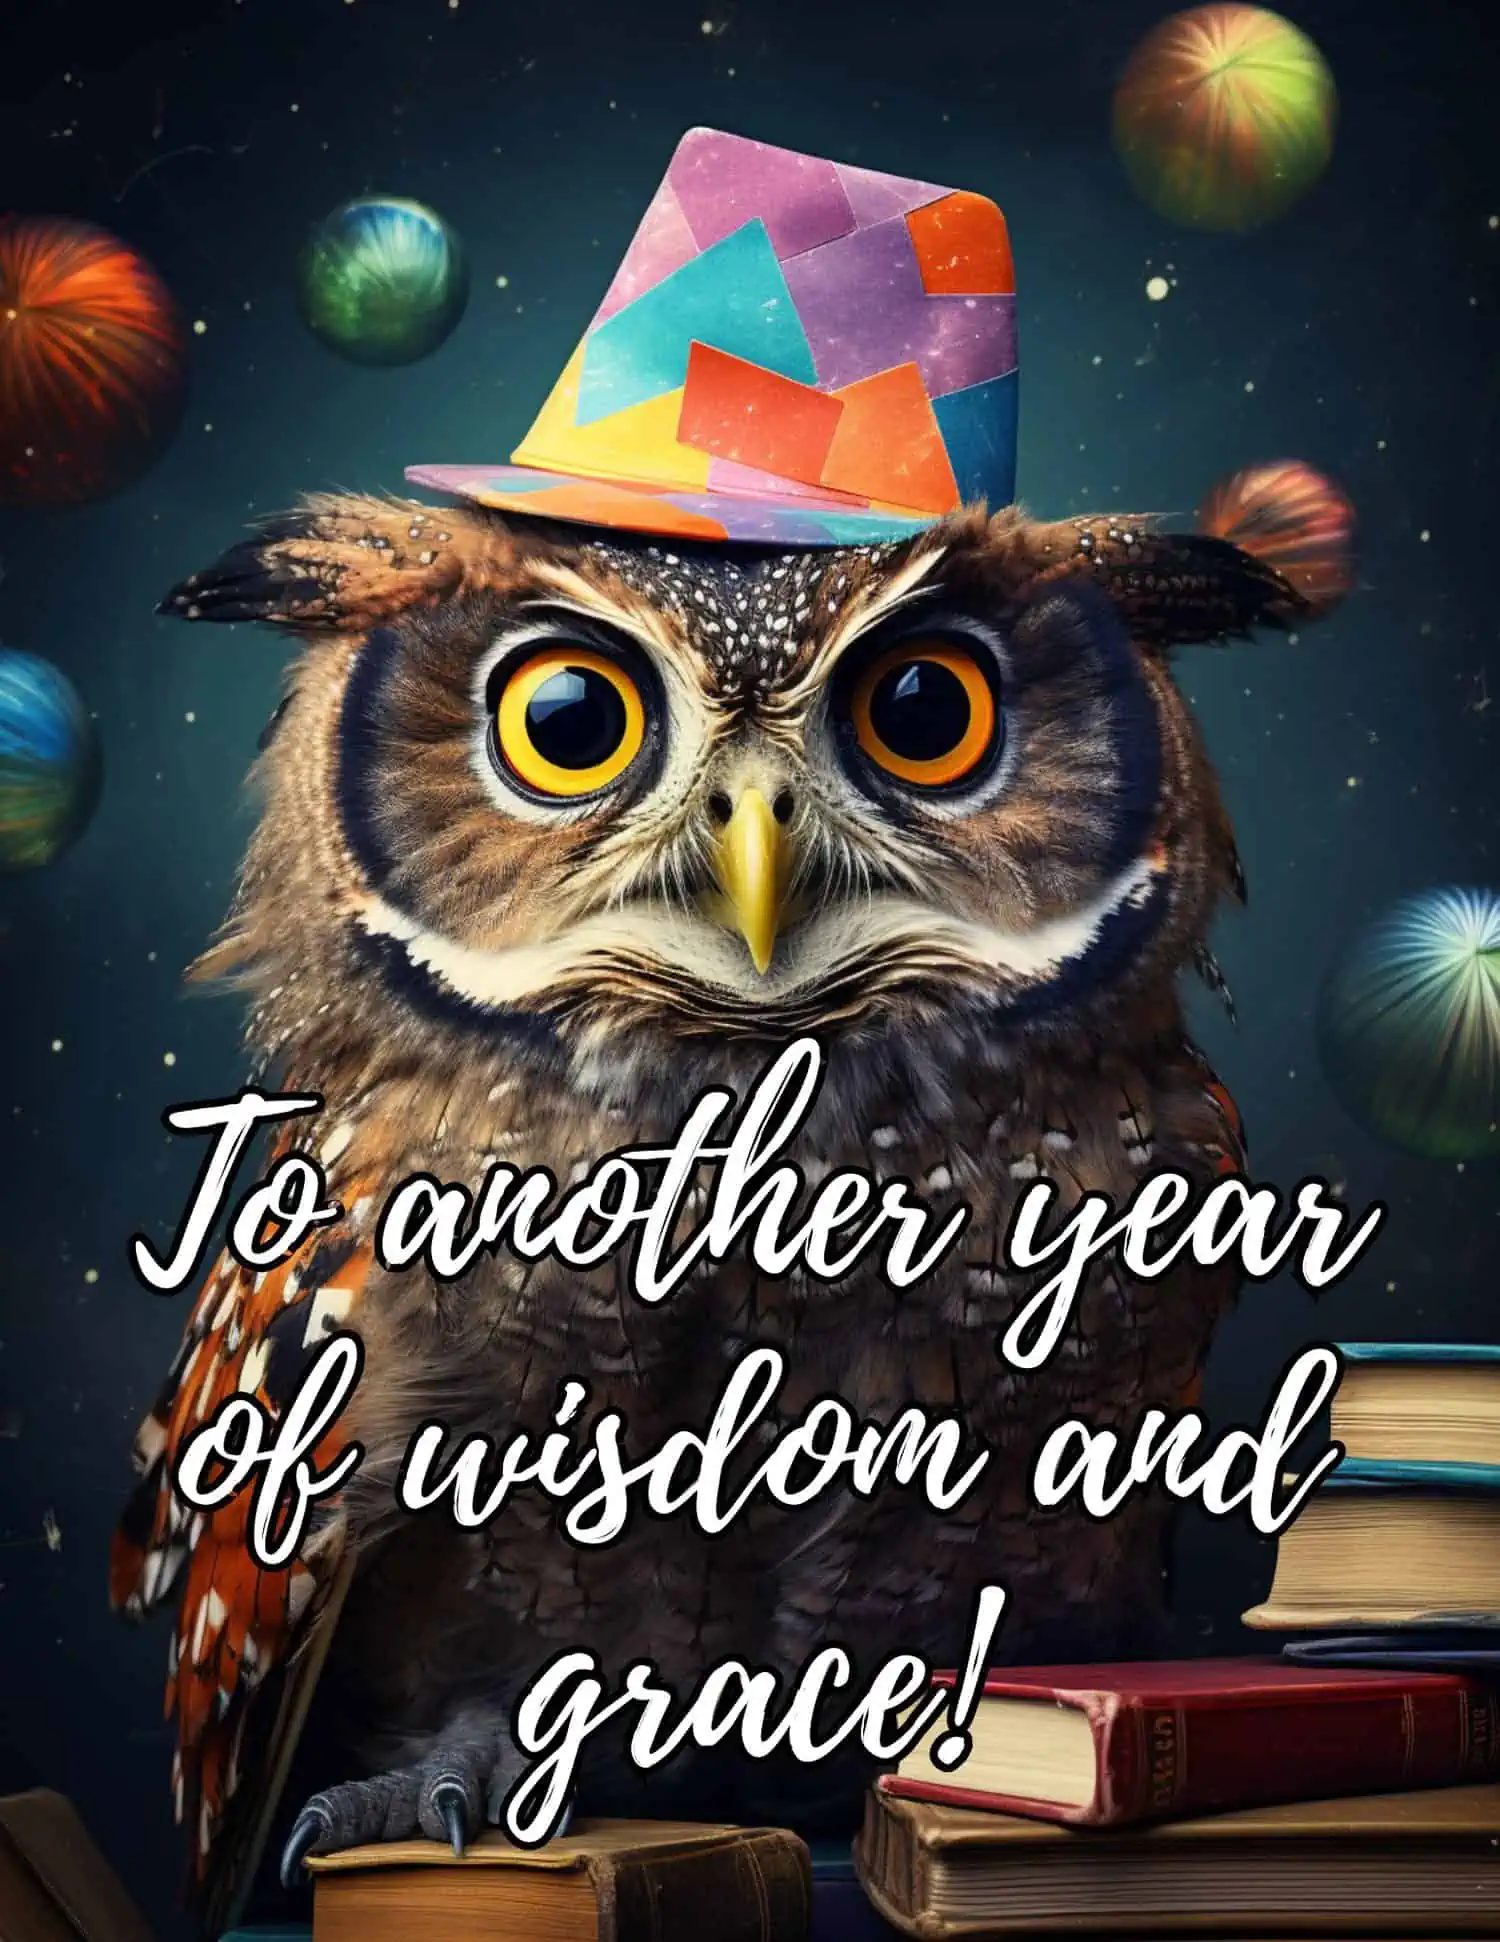 A collection of succinct and poignant birthday greetings tailored for educators.